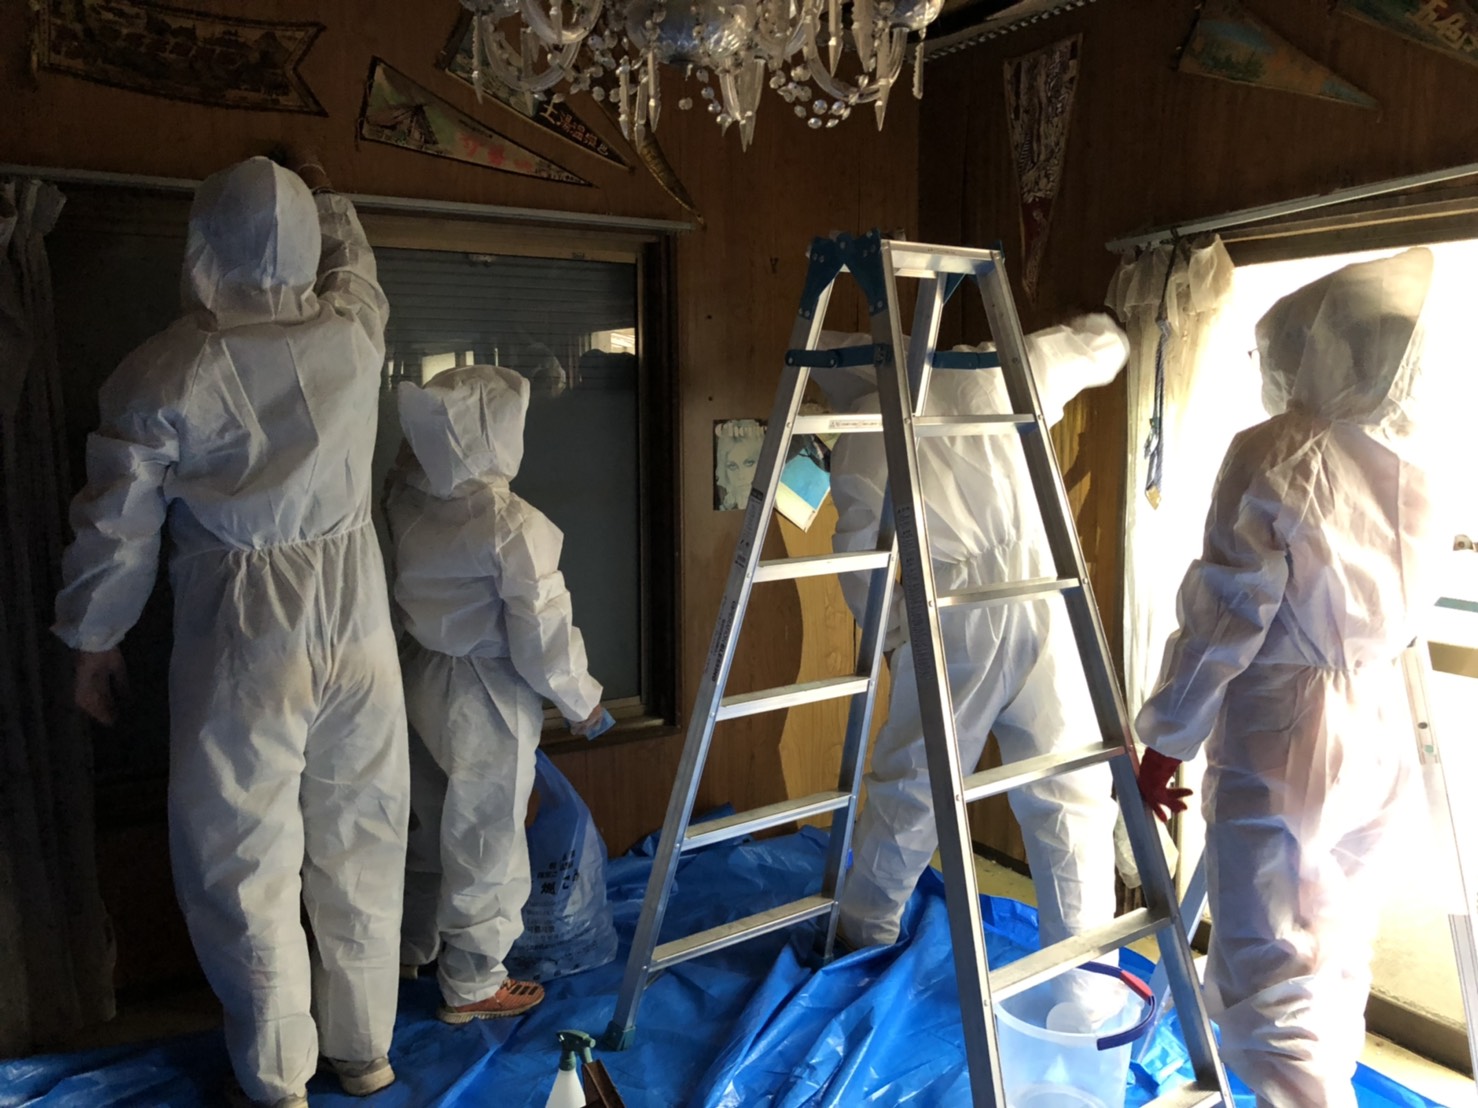 Mold_cleaning_in_a_damaged_house.jpg